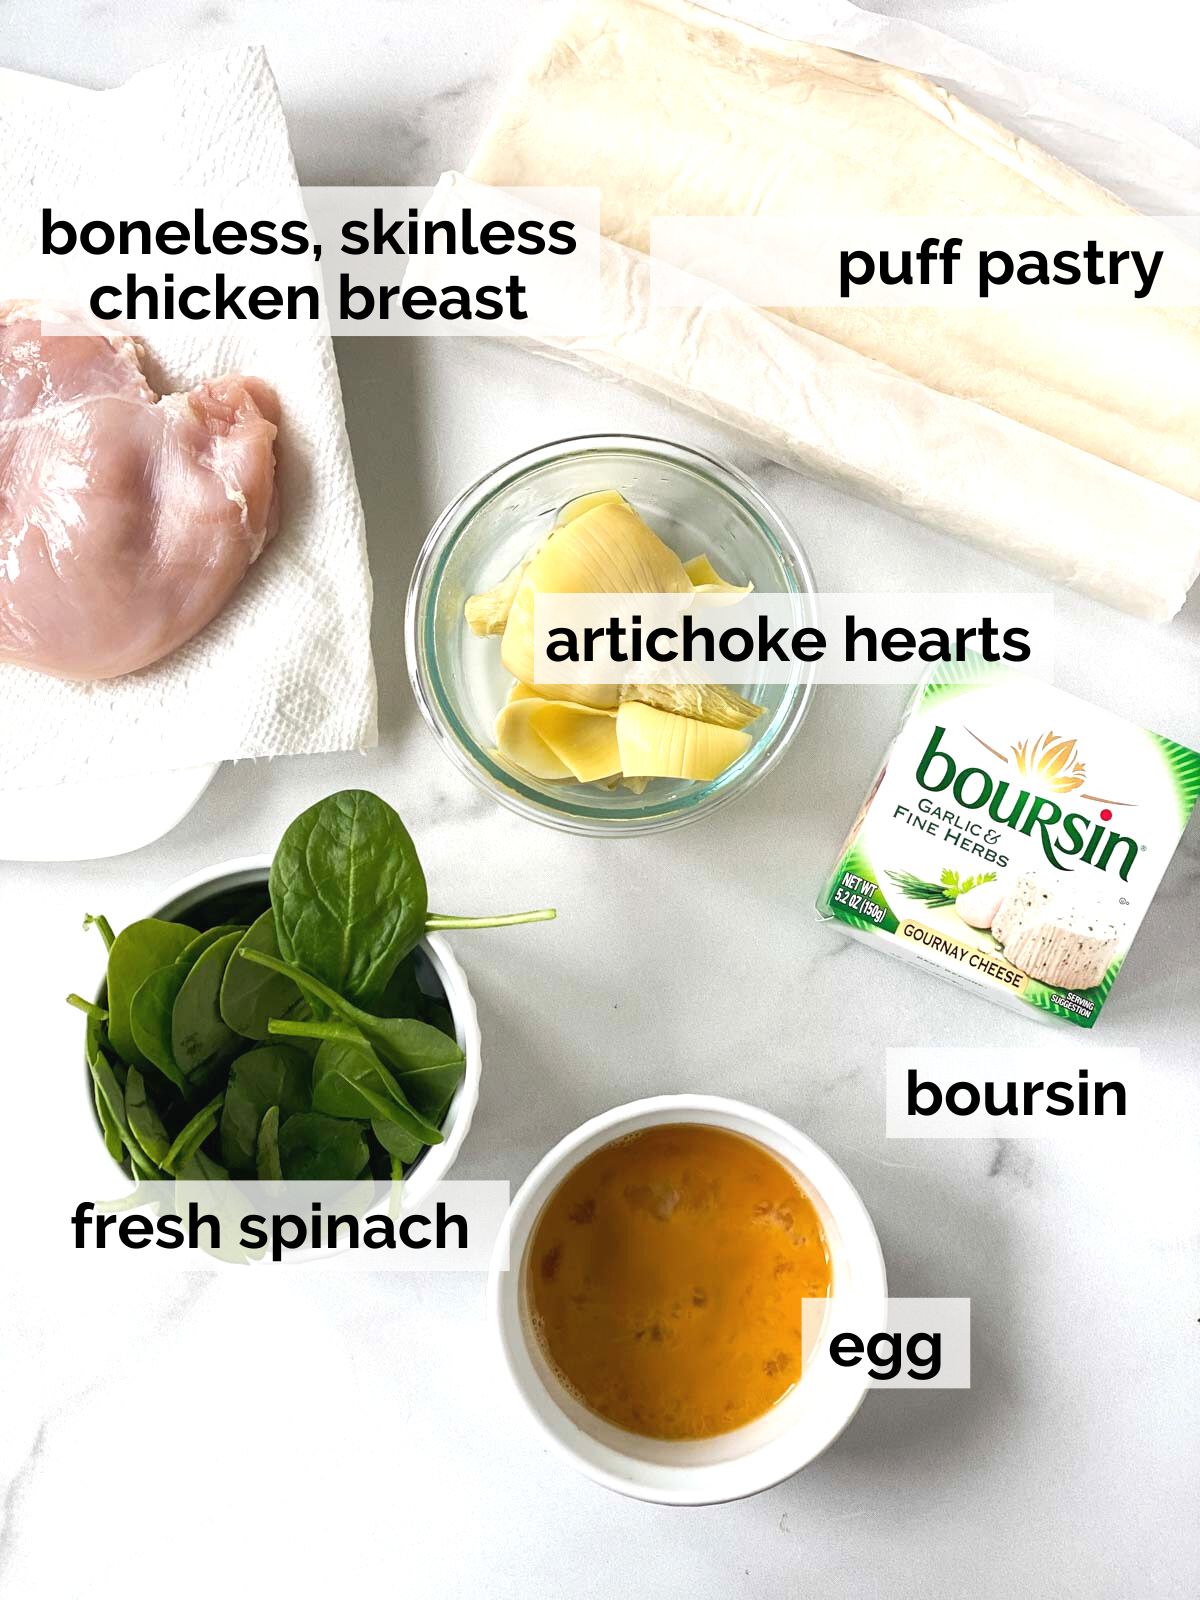 Ingredients for puff pastry chicken.